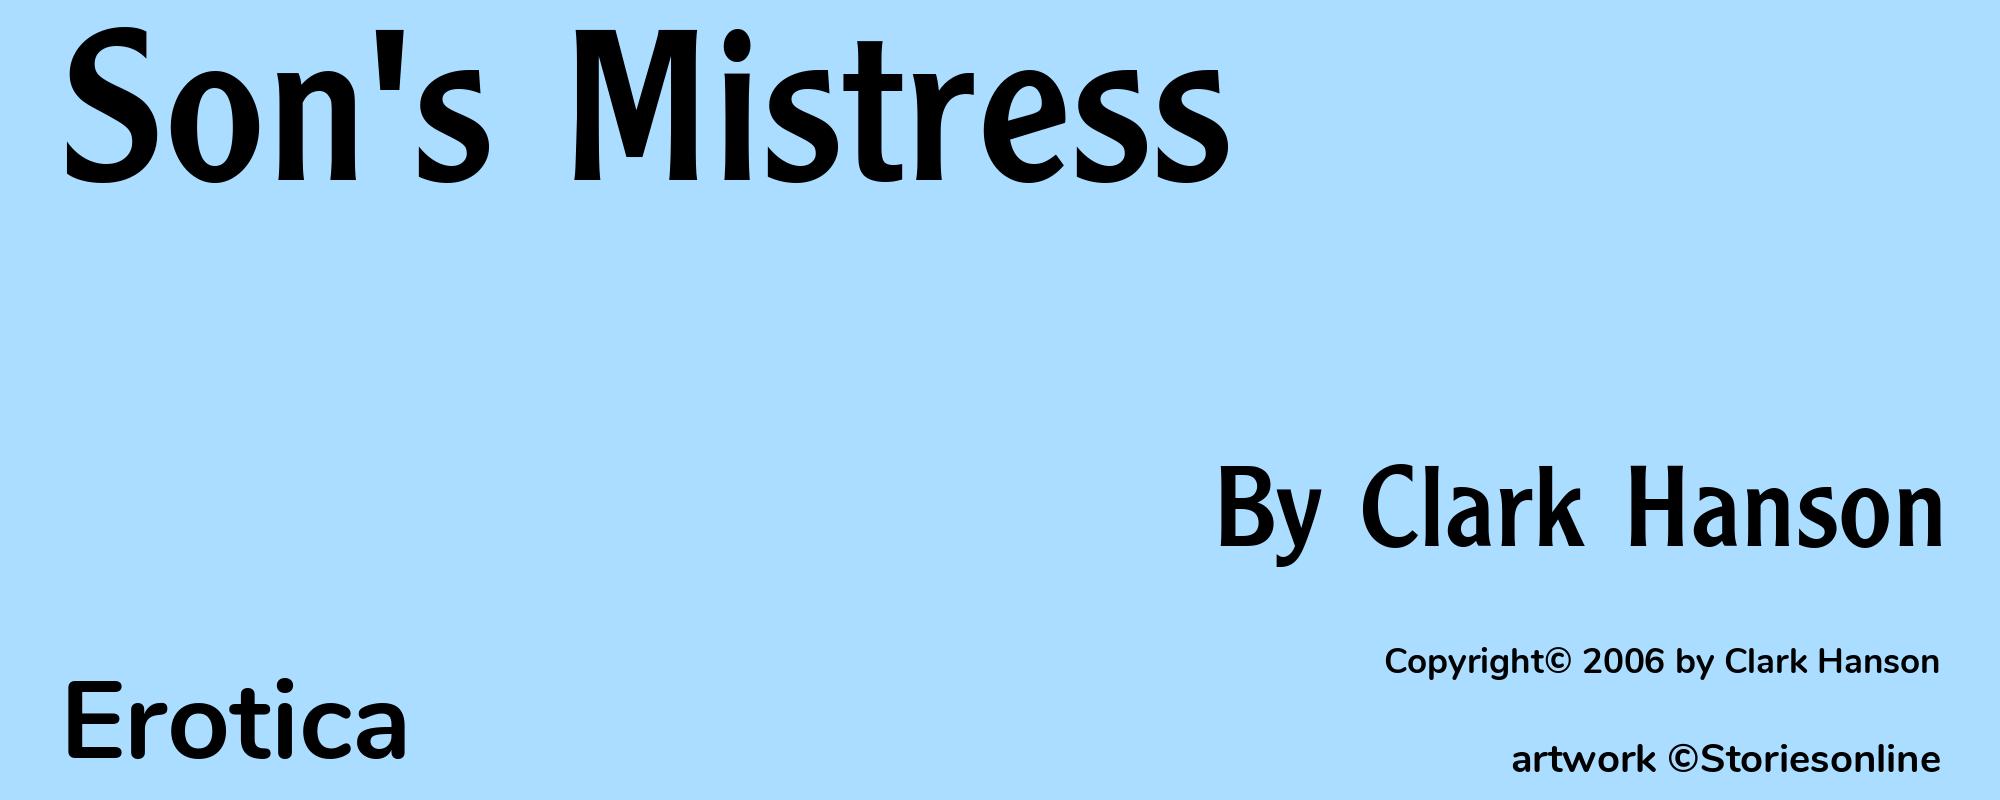 Son's Mistress - Cover